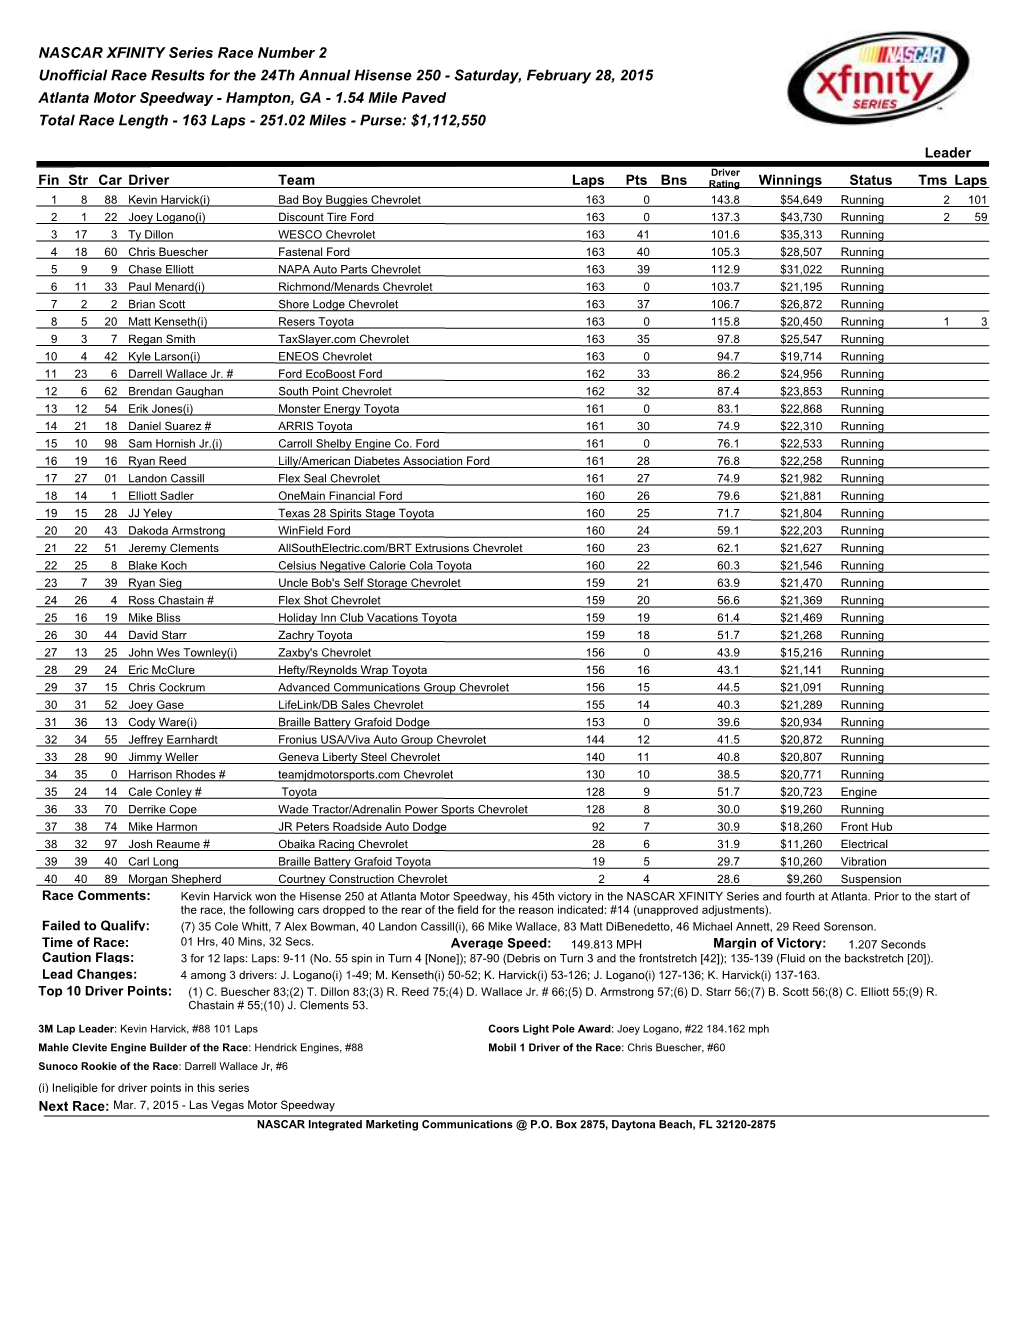 NASCAR XFINITY Series Race Number 2 Unofficial Race Results